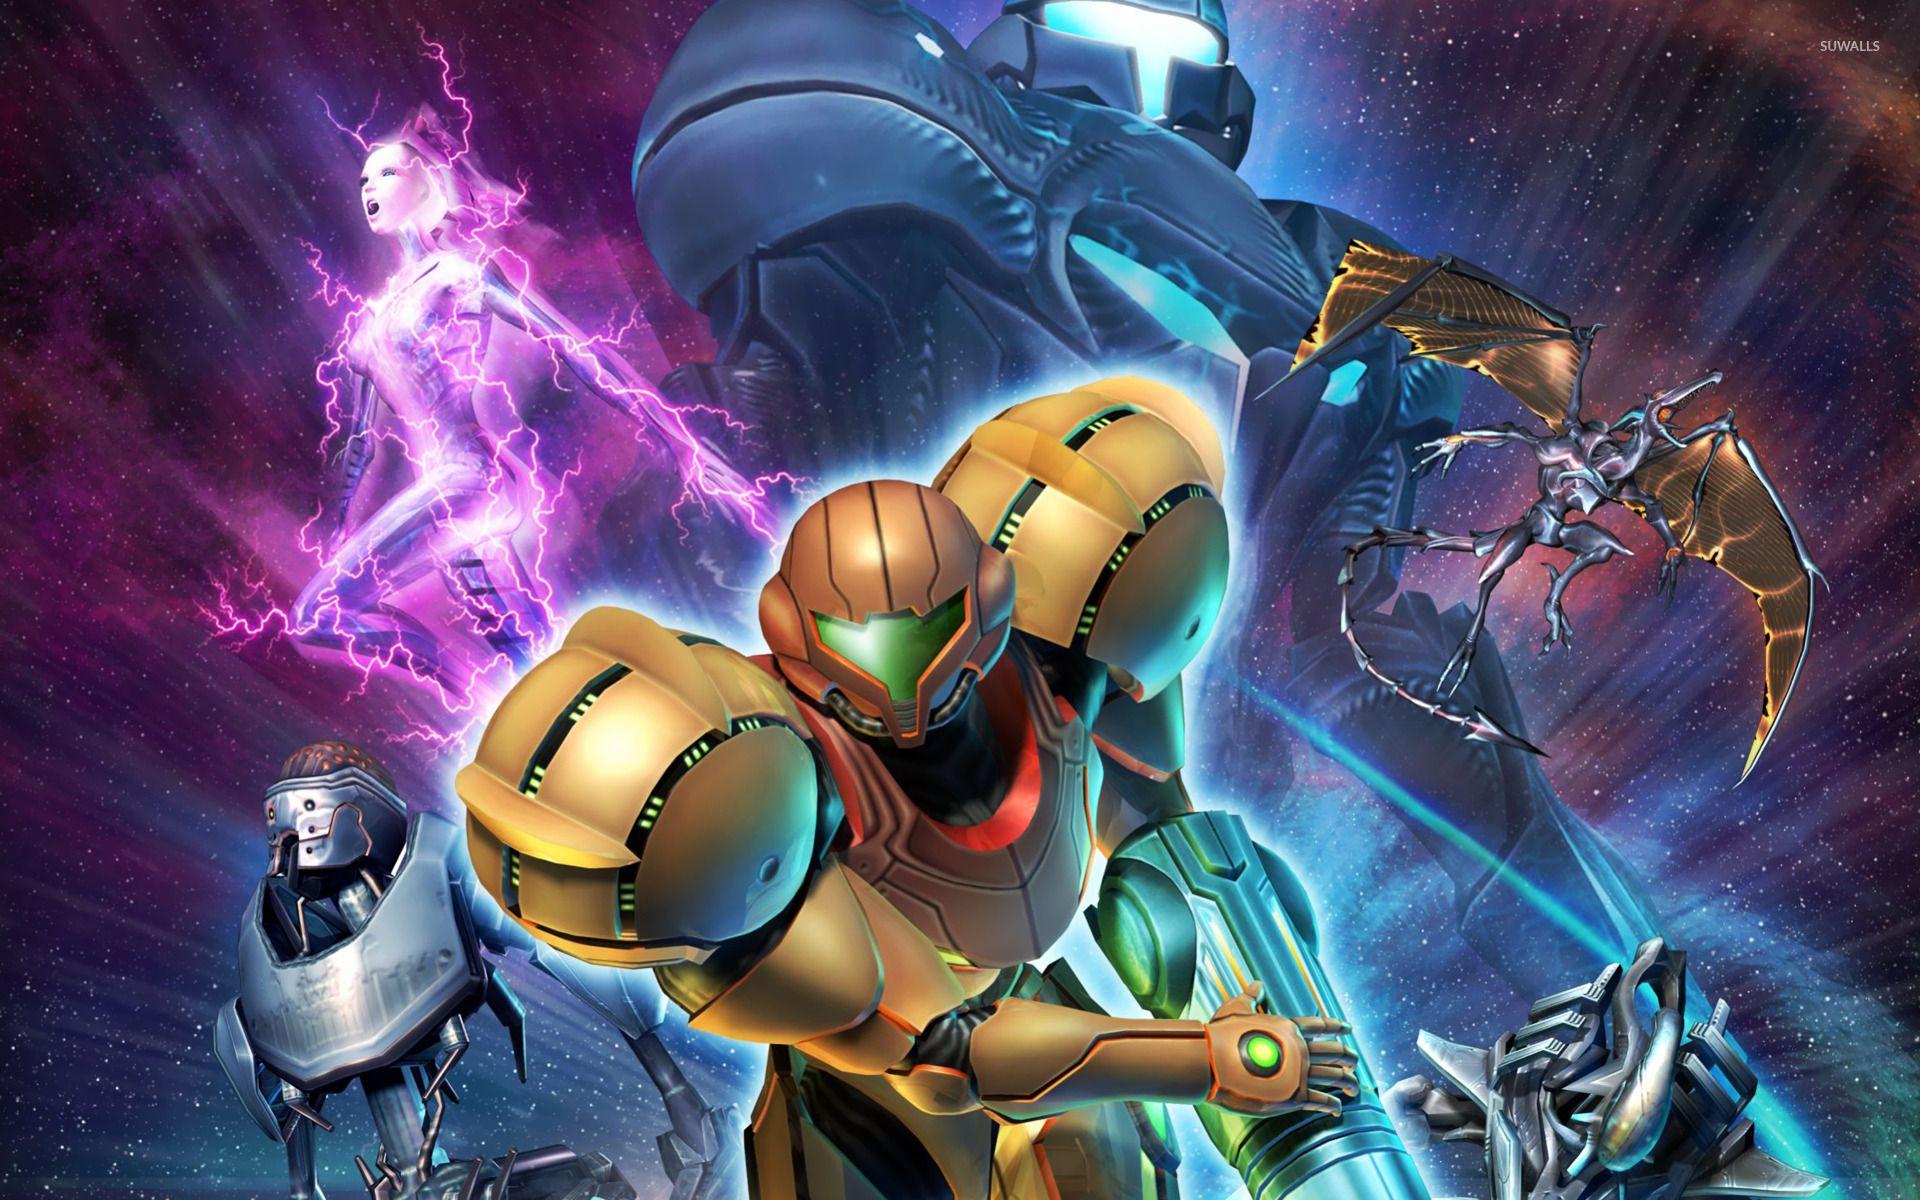 metroid prime remastered length